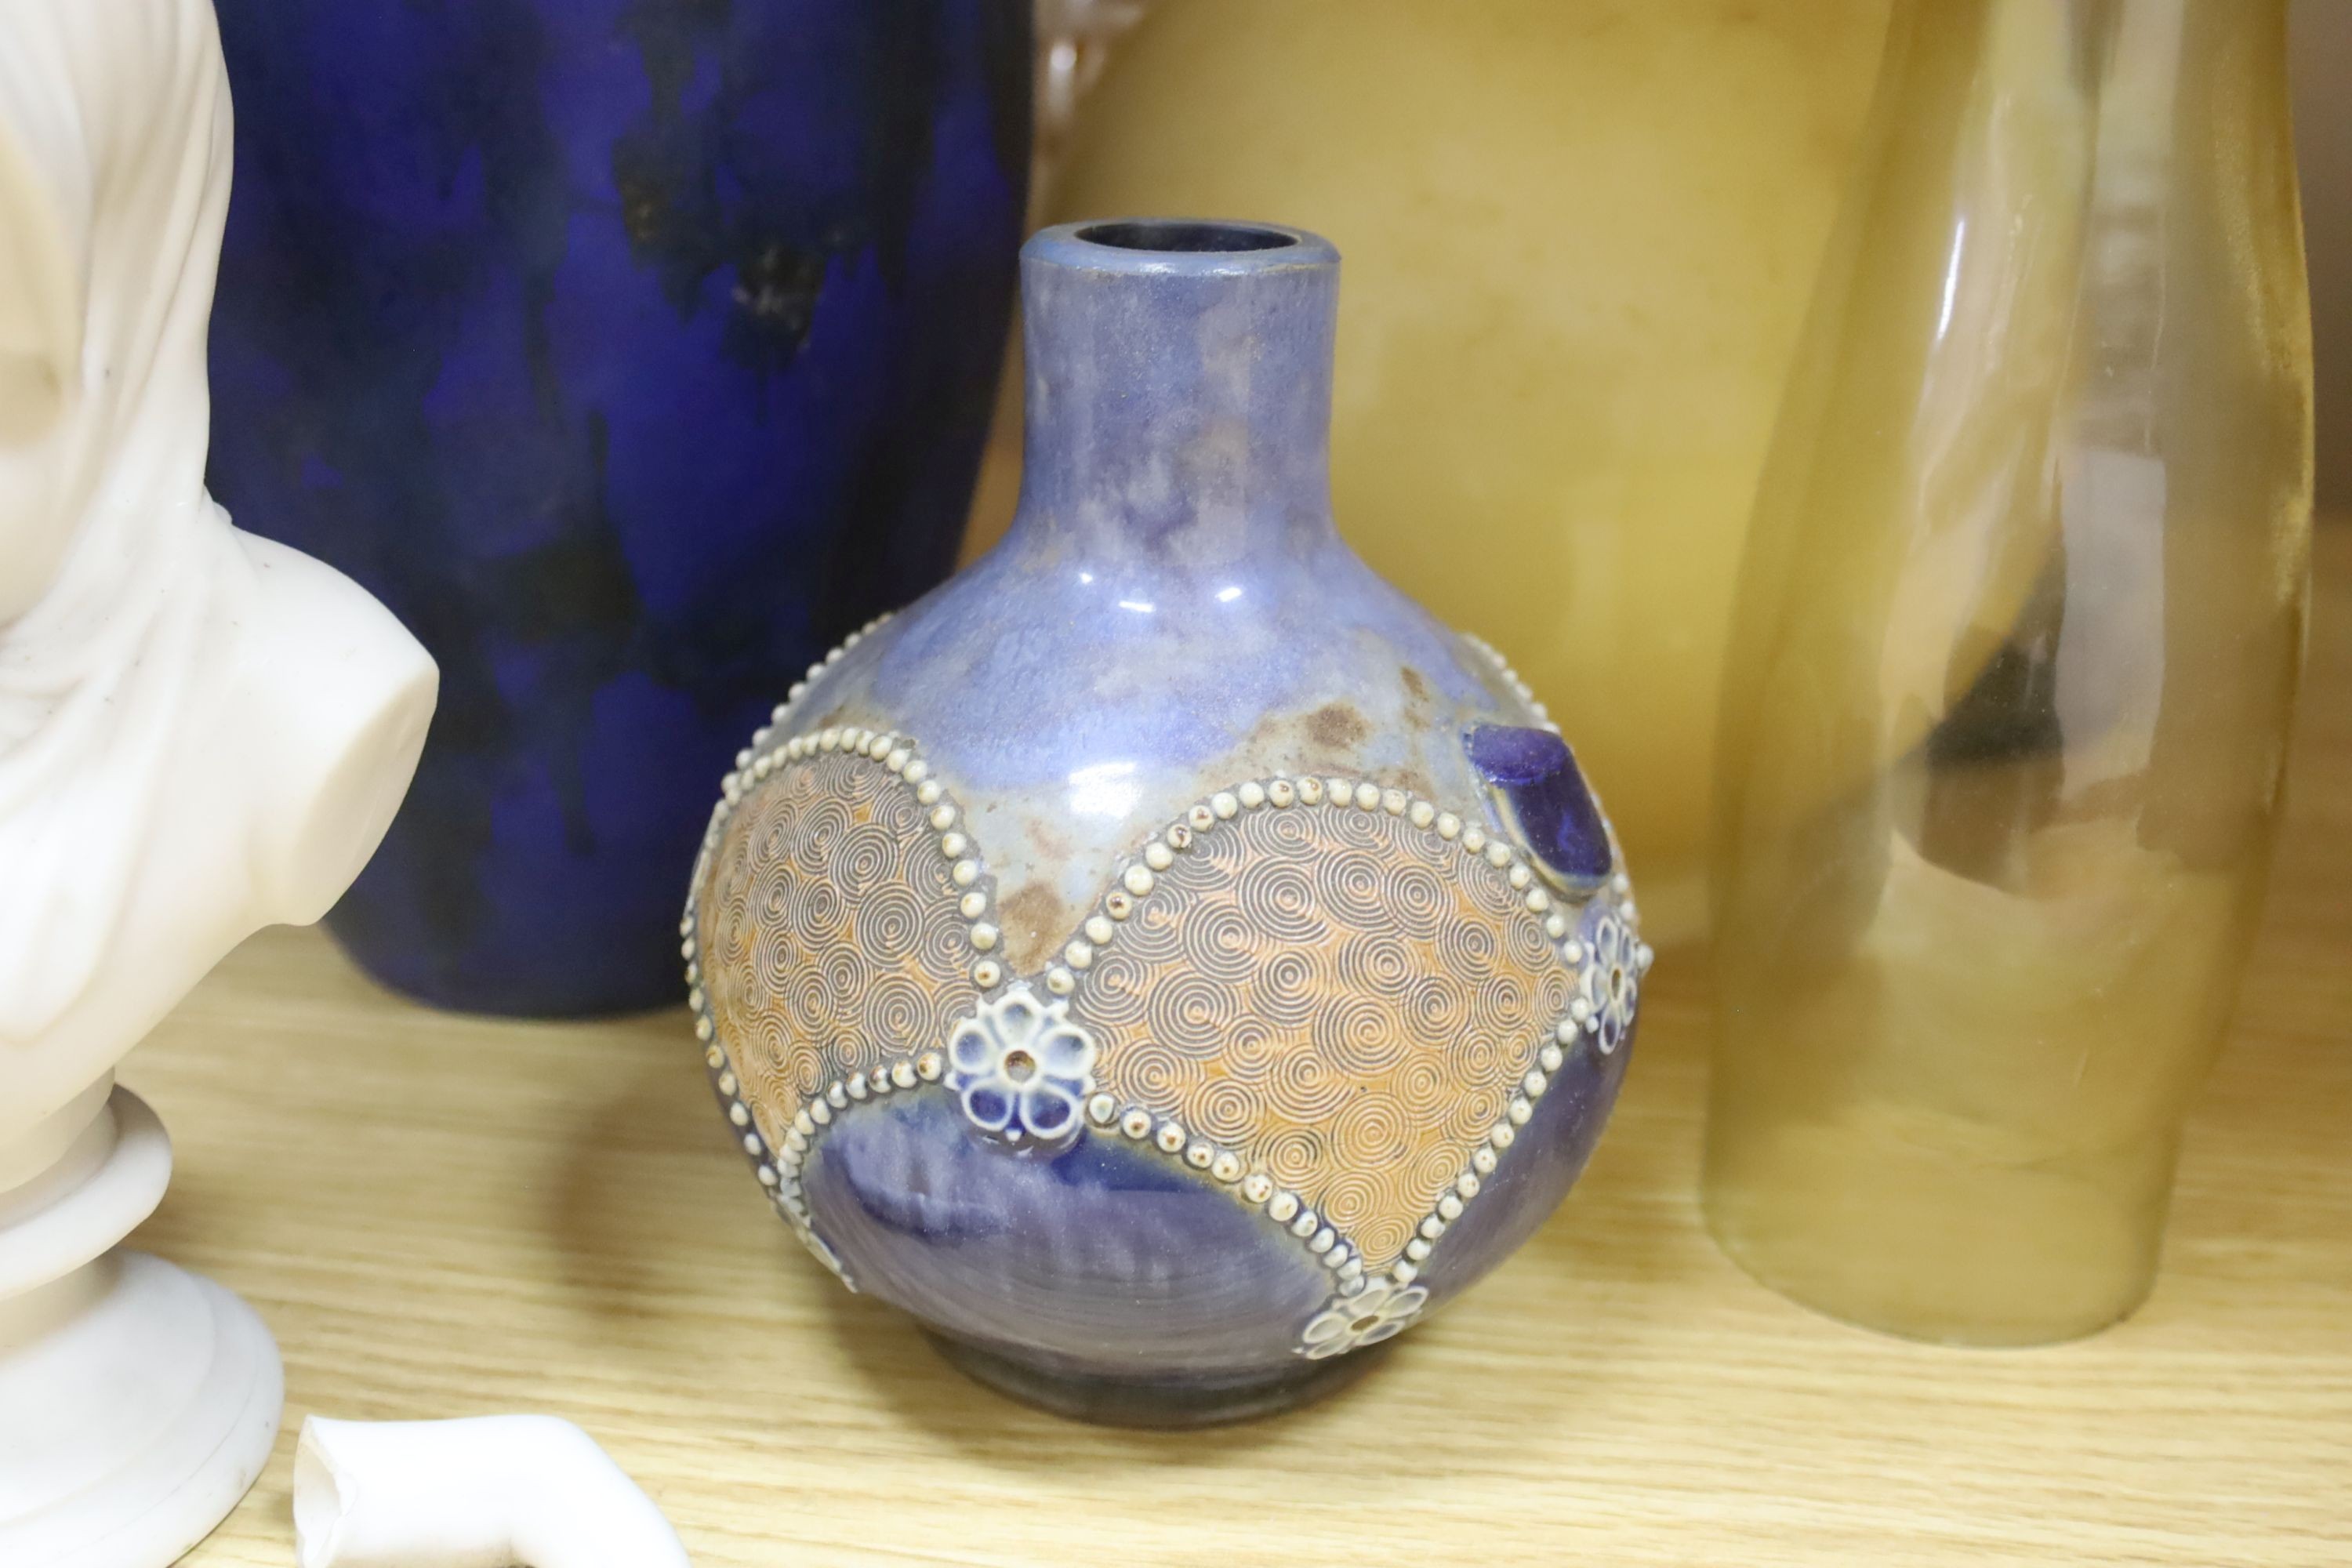 Mixed ceramics, overlaid glass vase and a Victorian oil lamp